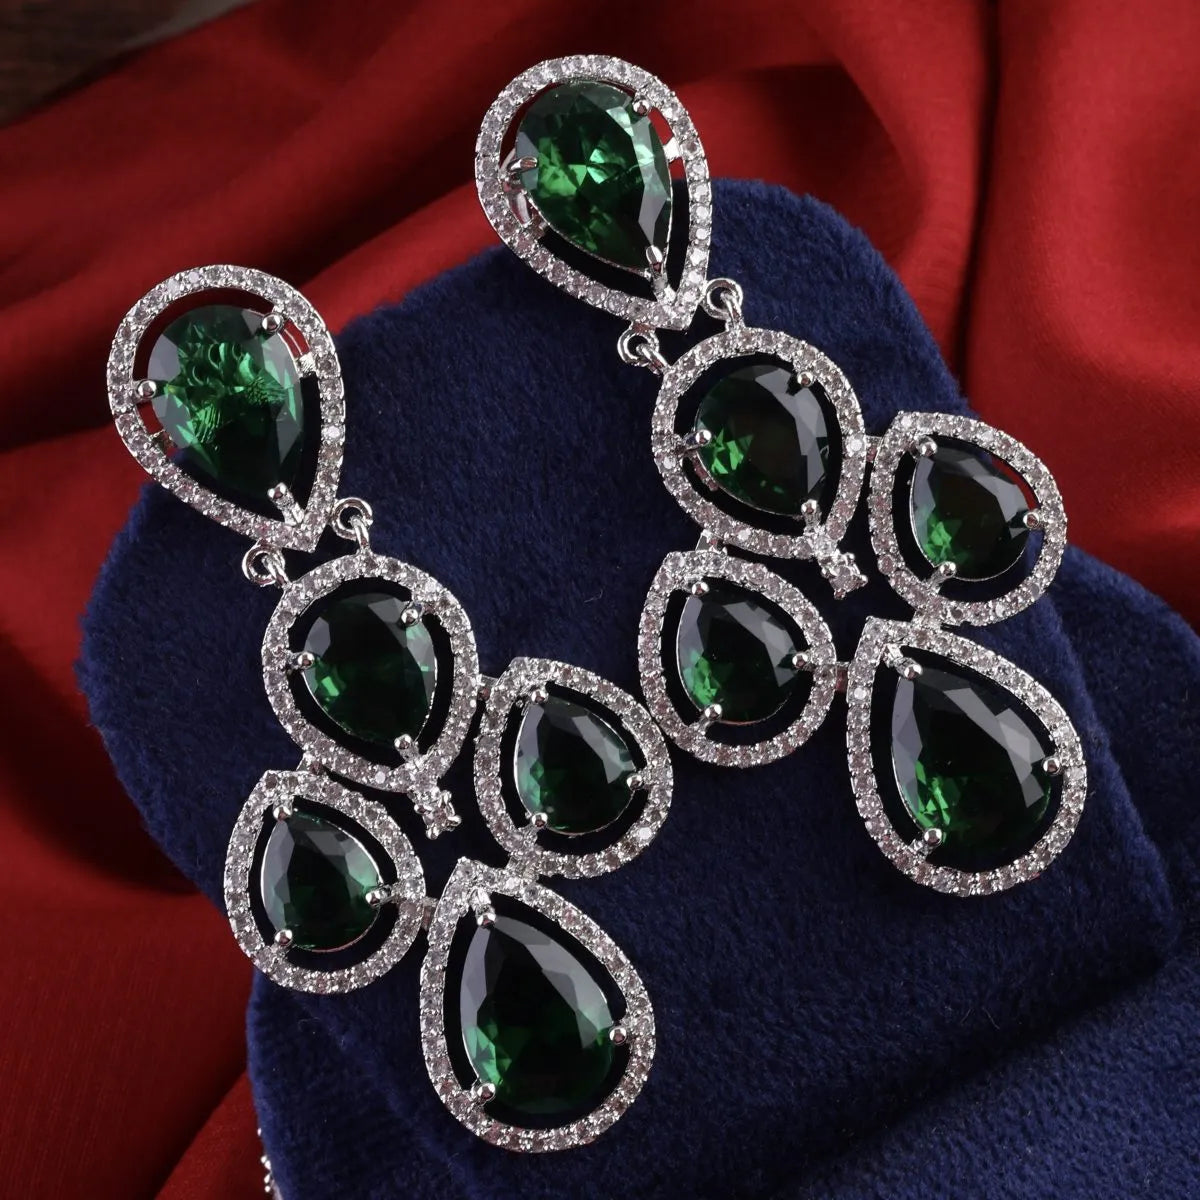 Emerald Green Annie American Diamond Necklace Set with Earring